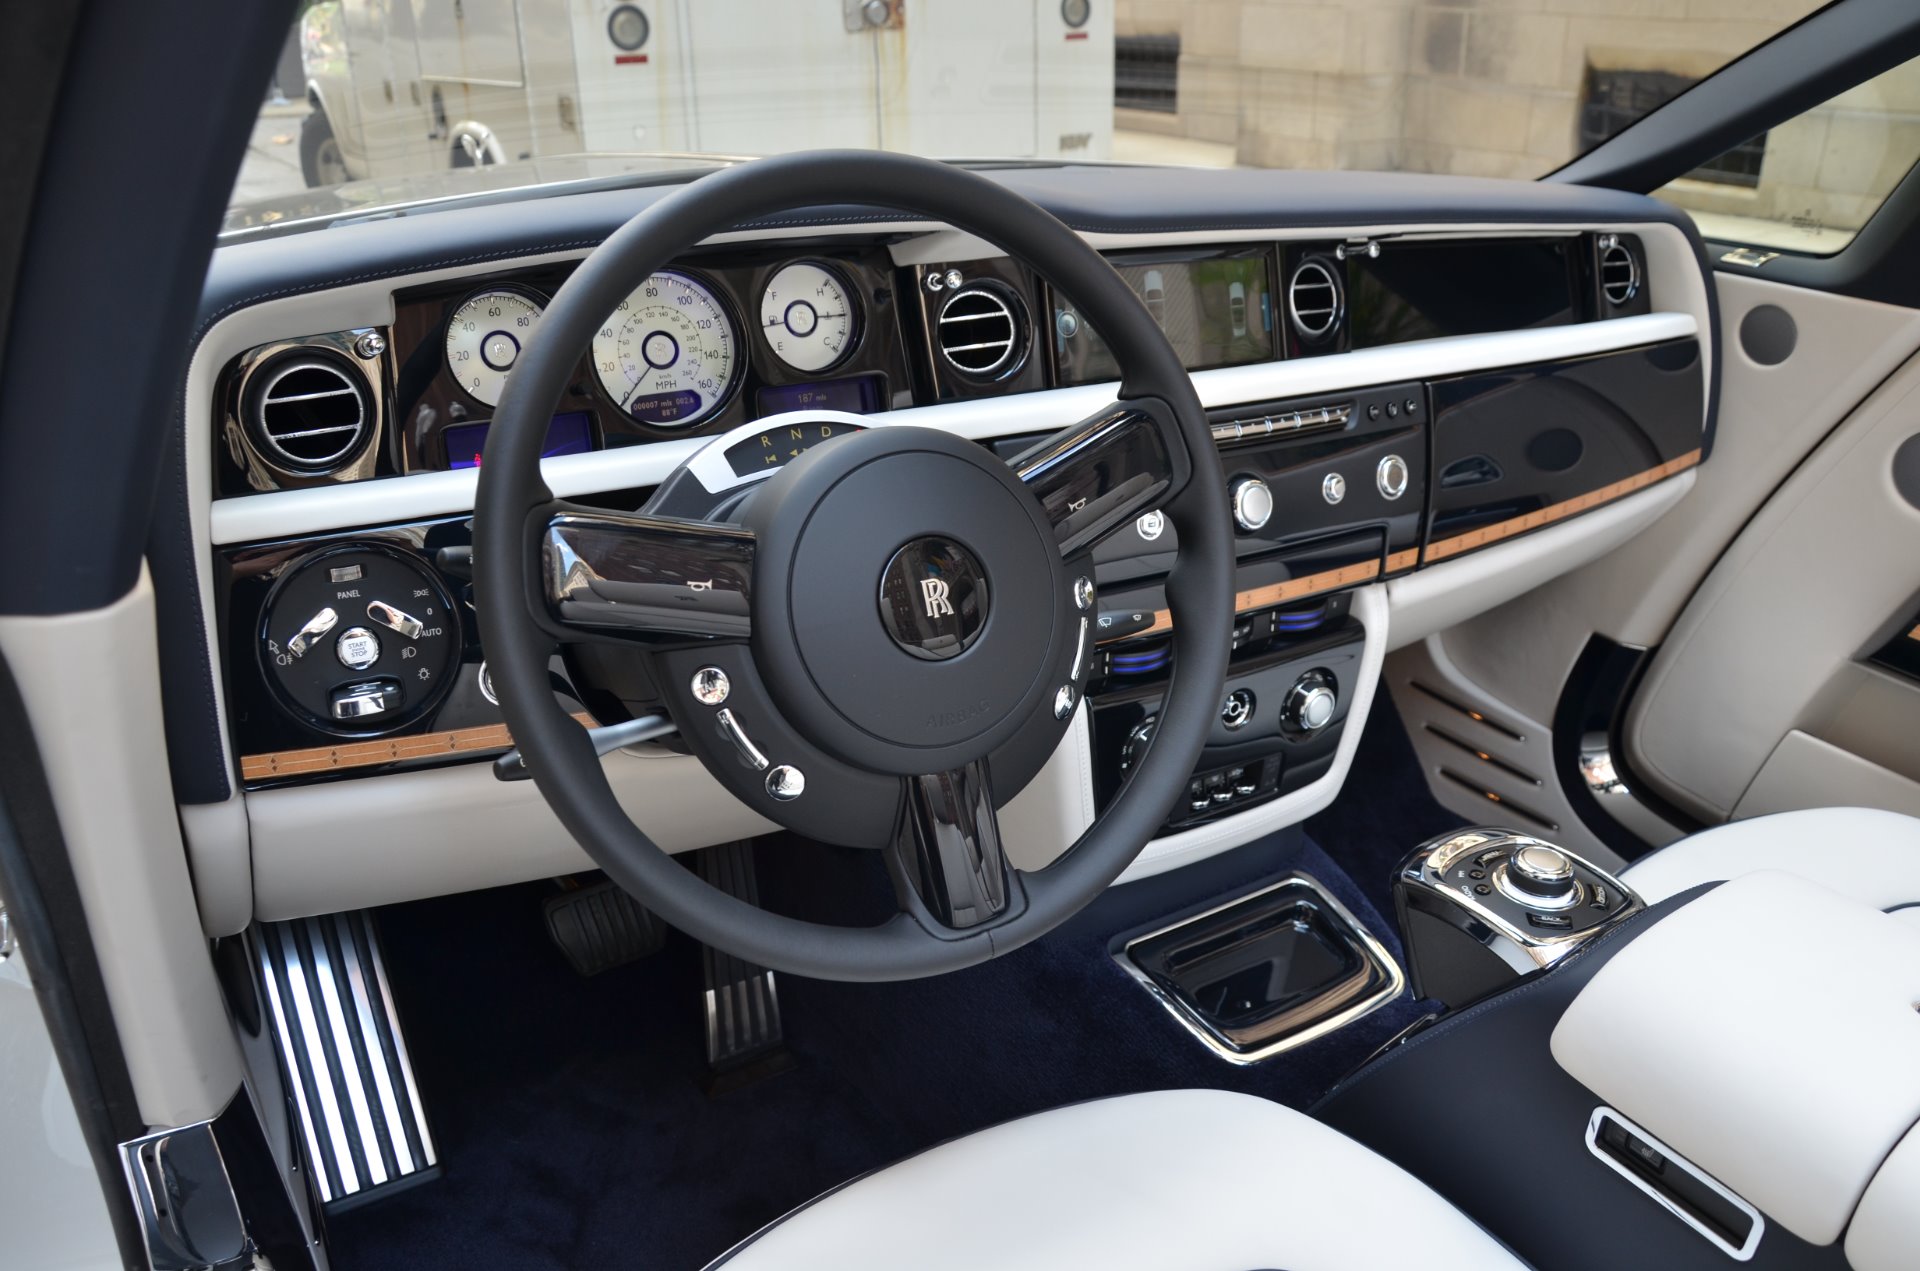 Used 2017 RollsRoyce Phantom Drophead Coupe For Sale Sold  Bentley Gold  Coast Chicago Stock R317